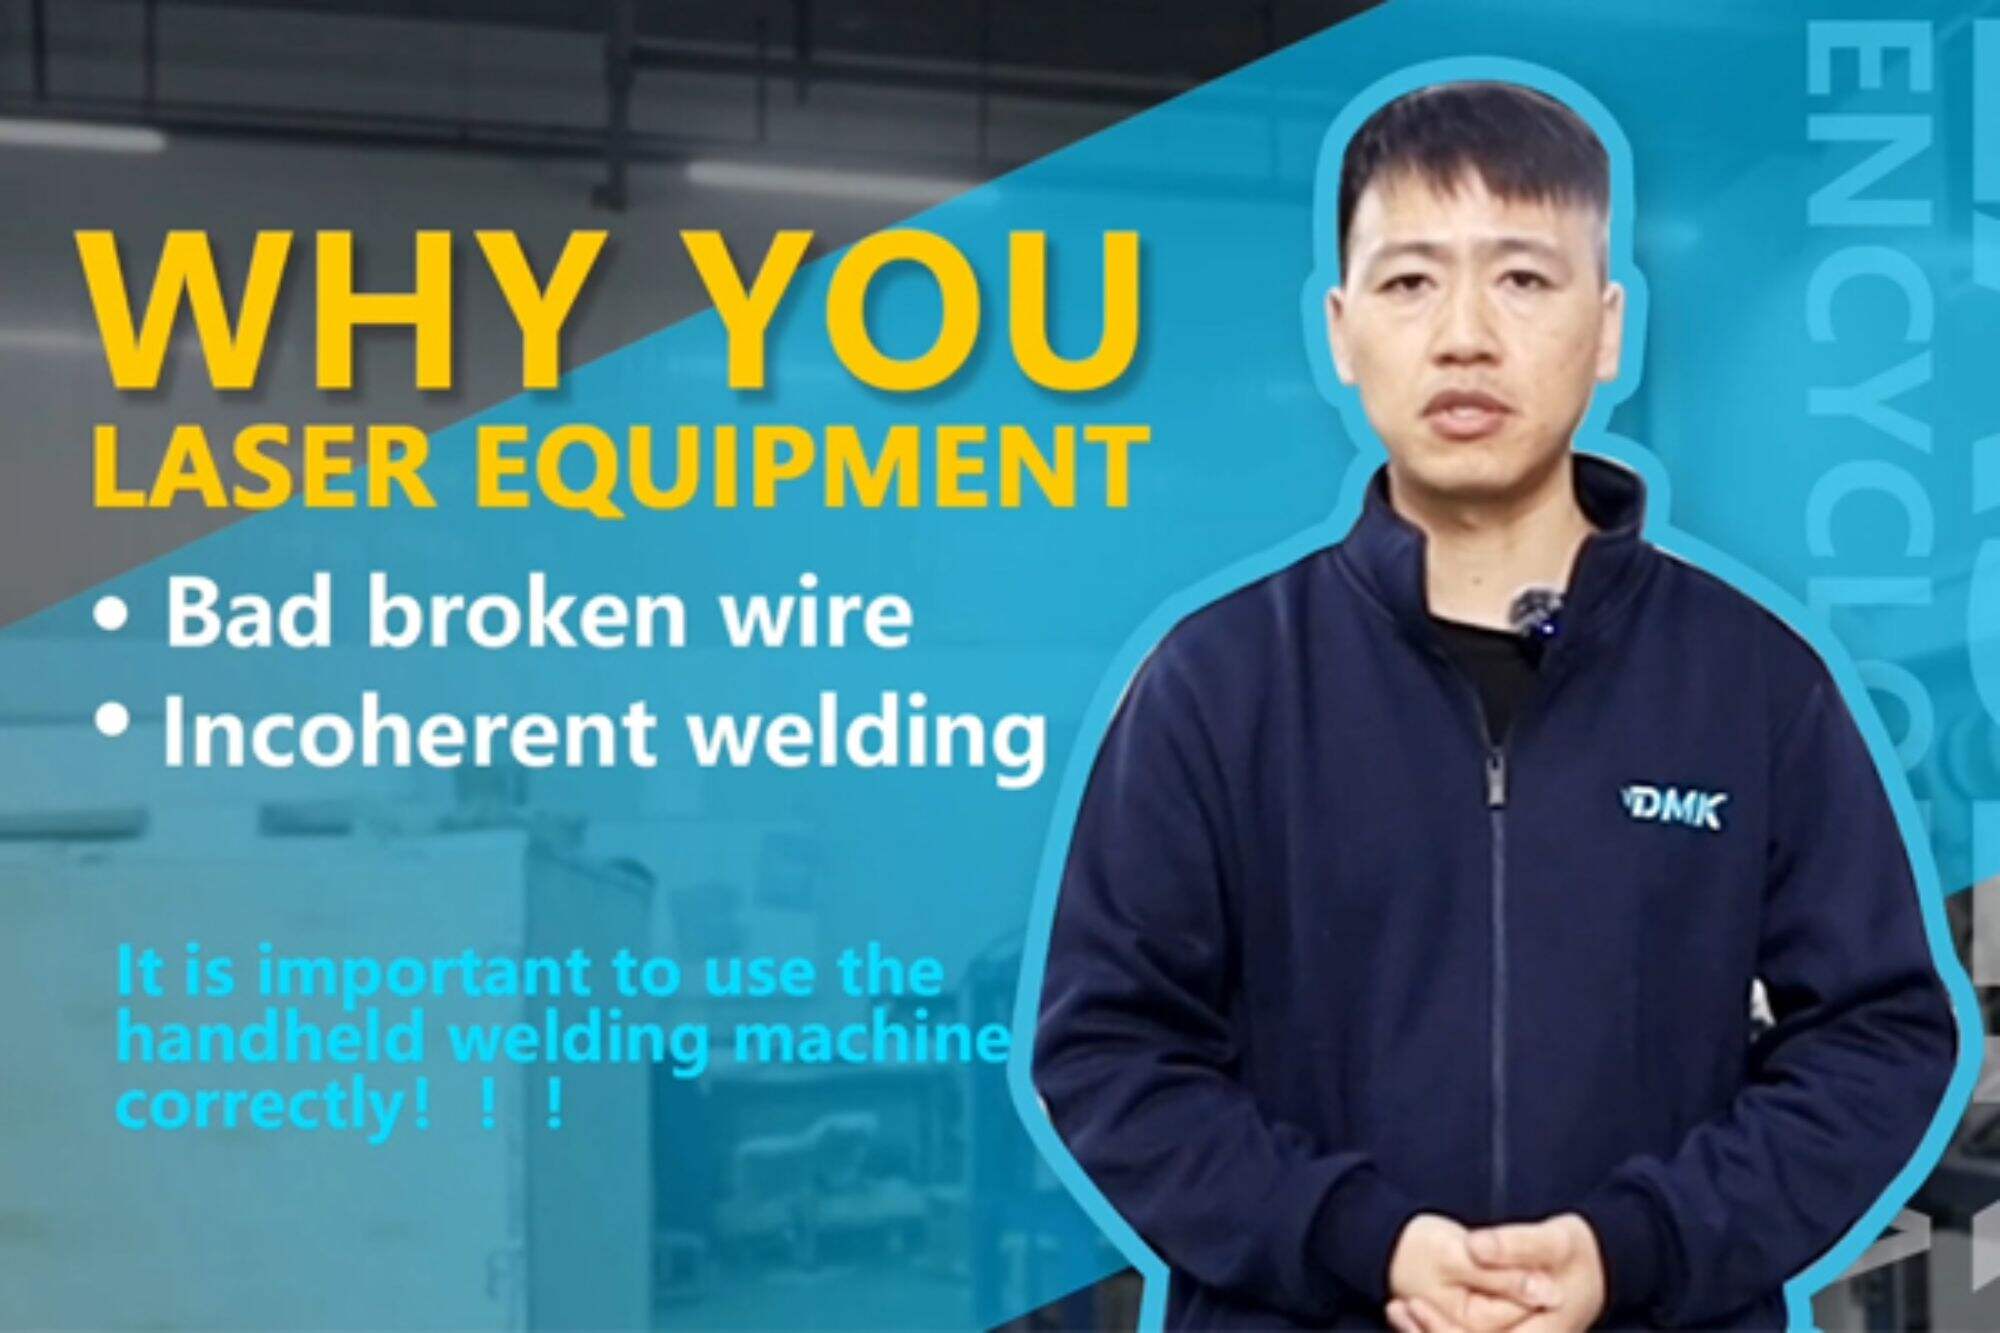 Correct wire breaking tips for laser welding machines